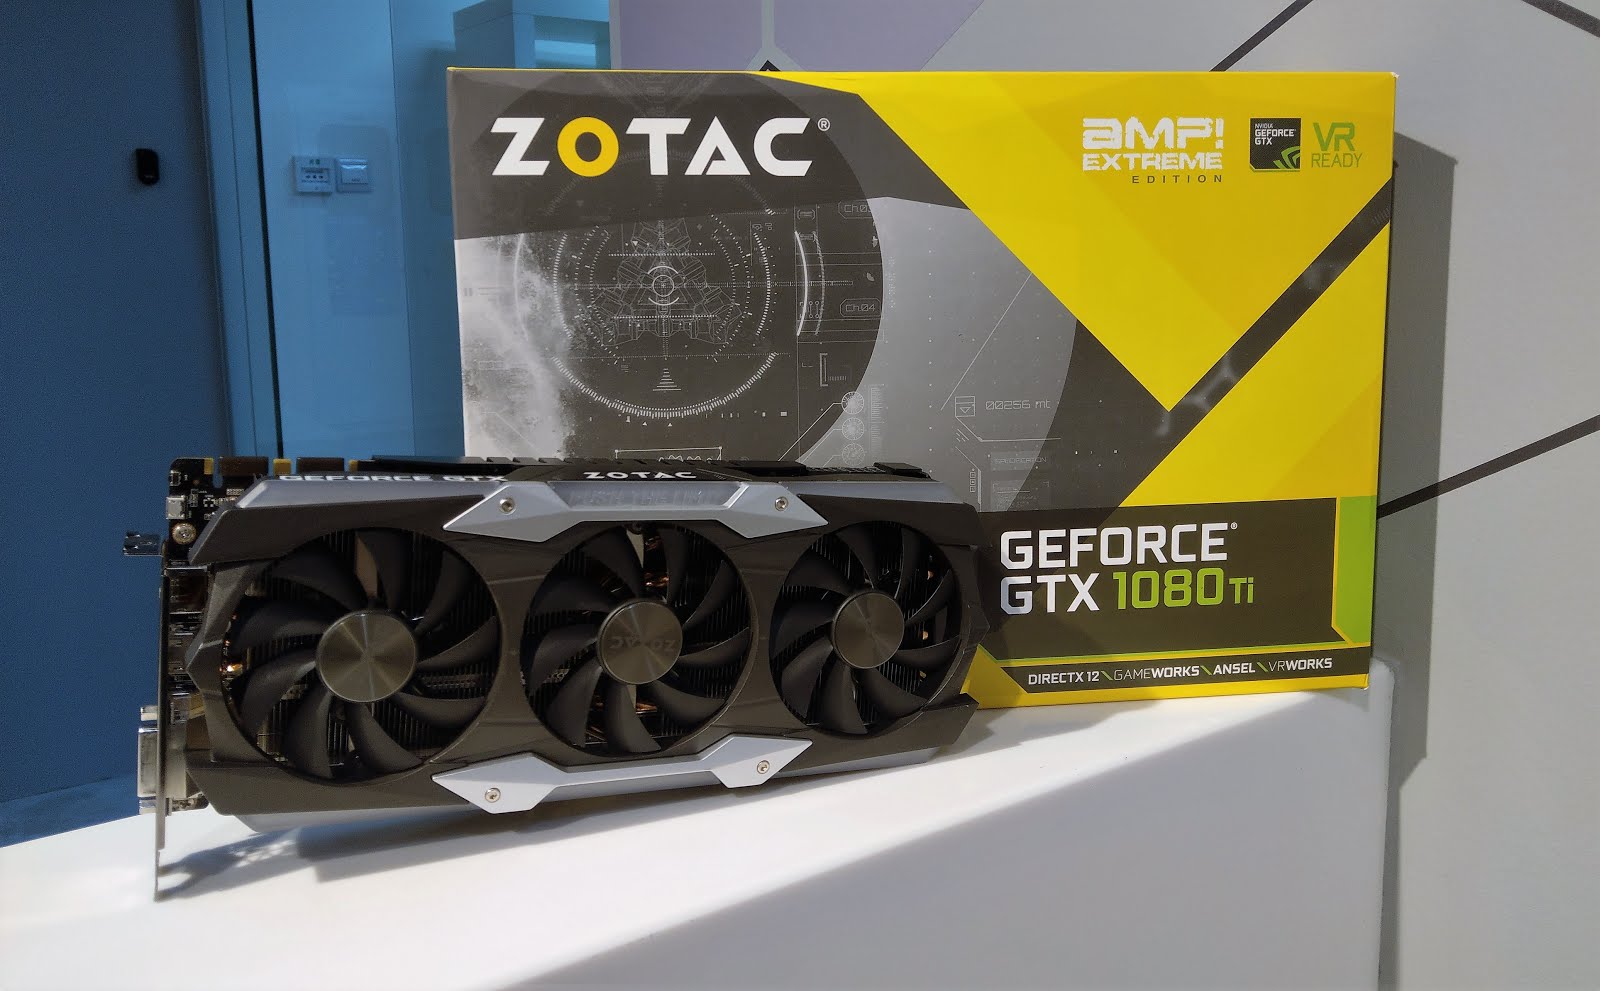 Zotac Geforce Gtx 1080 Ti Amp Extreme Review Amping Up The Ante In Gaming The Tech Revolutionist